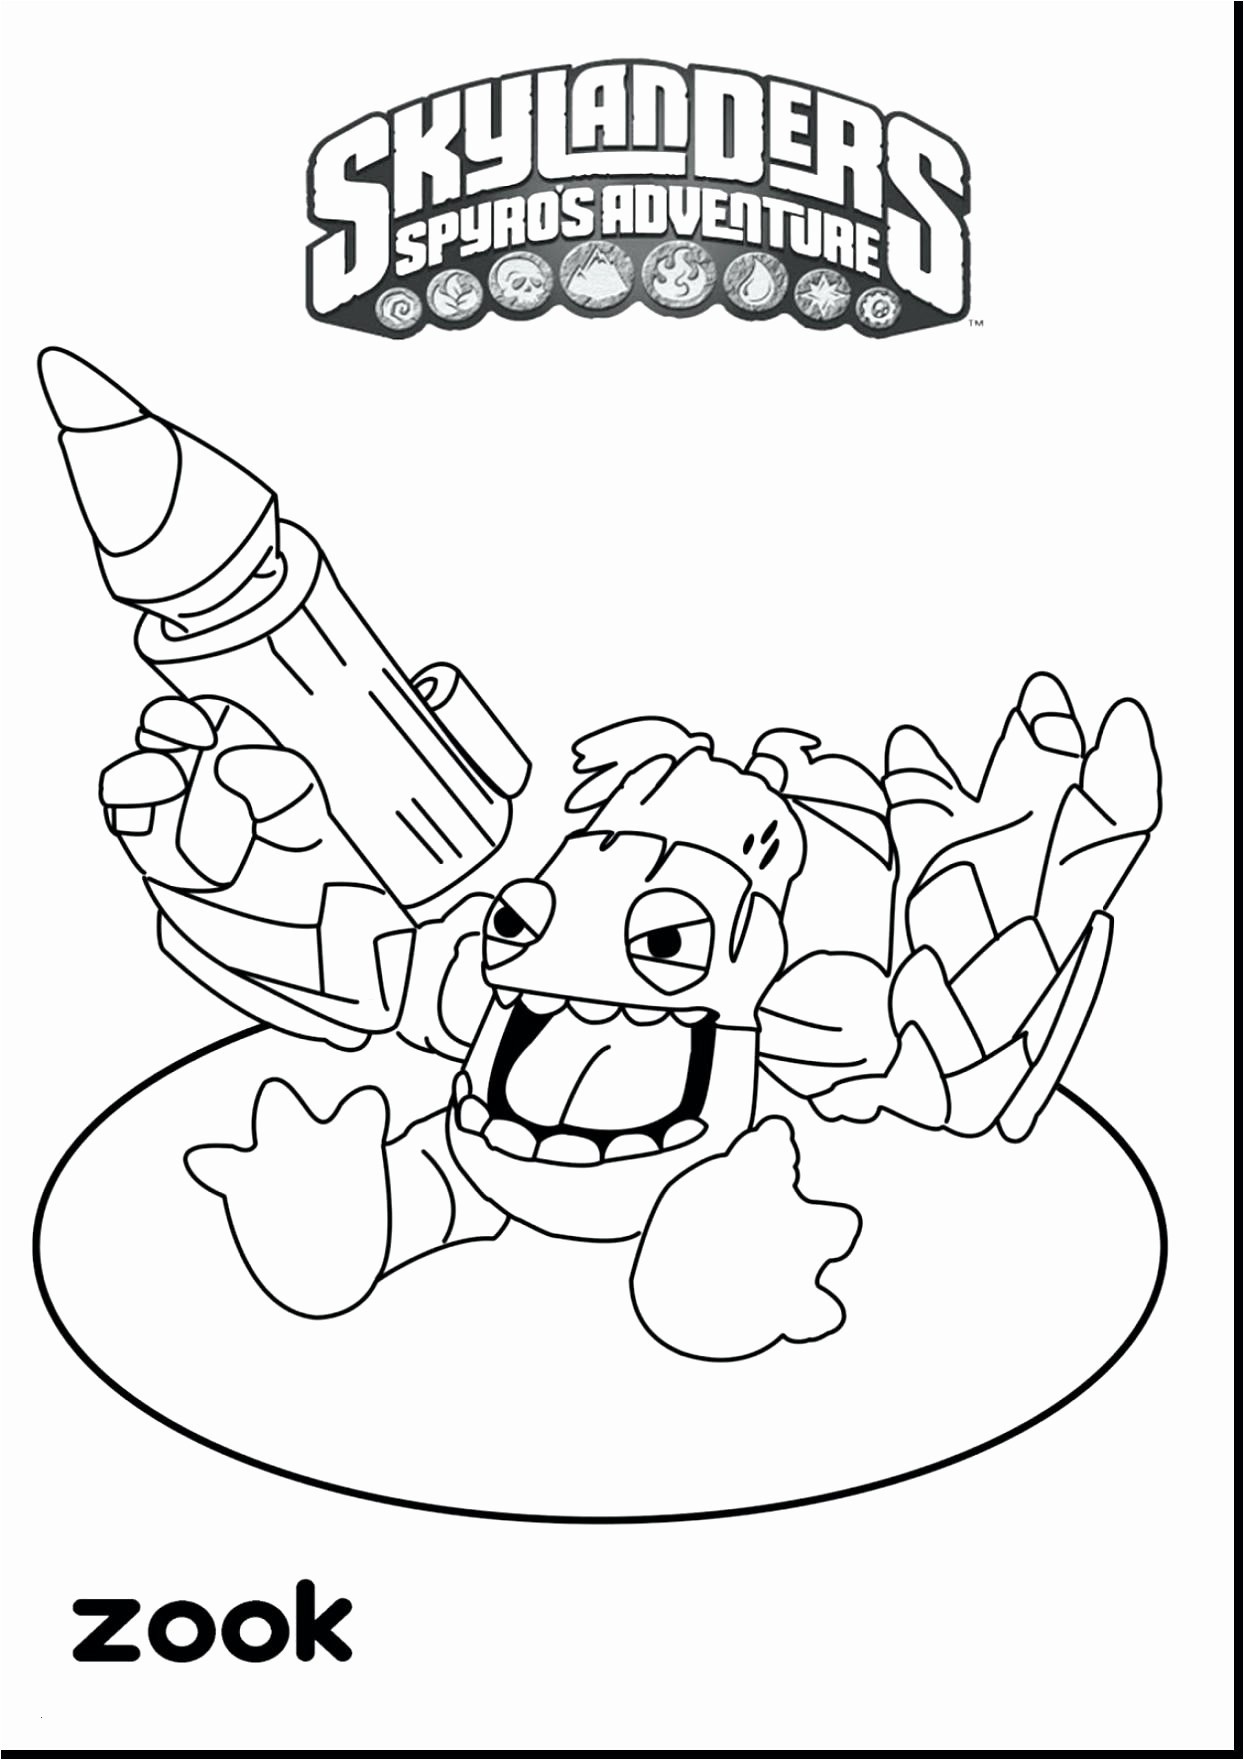 Dinosaurs Coloring Pages Luxury Coloring Pages Cool Coloring Pages